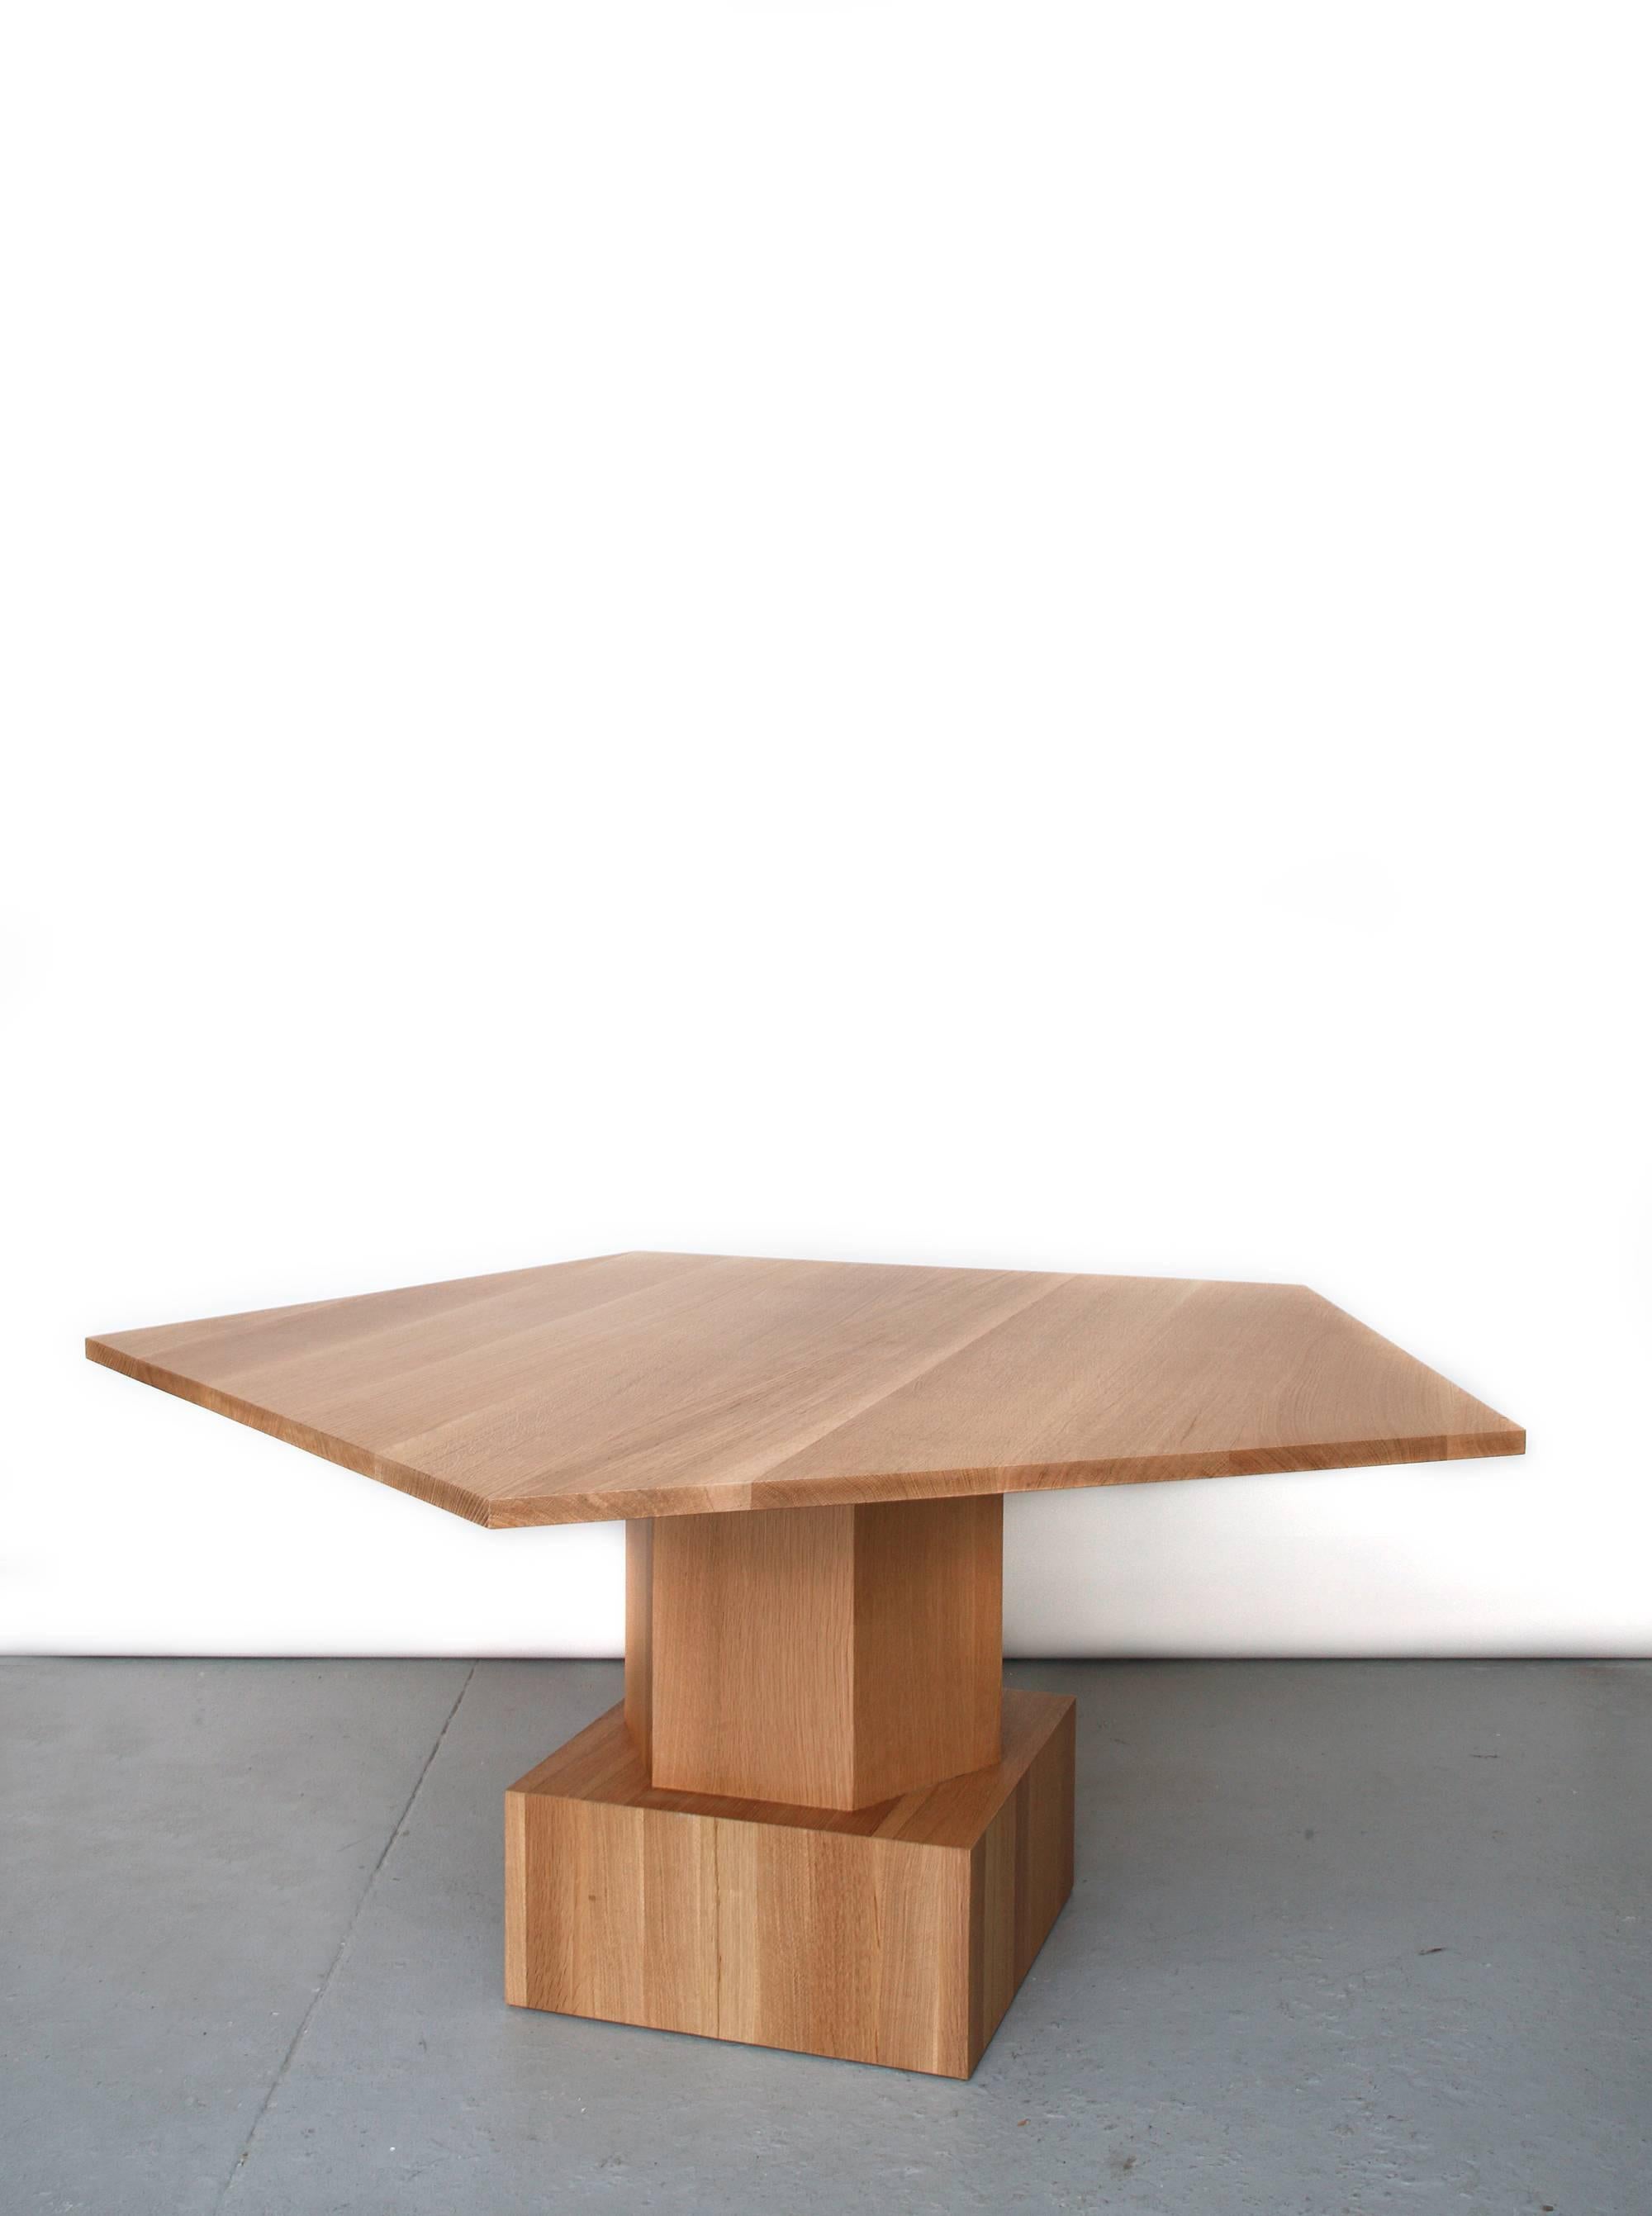 Walnut Dining or Center Table by Tinatin Kilaberidze In Excellent Condition For Sale In New York, NY